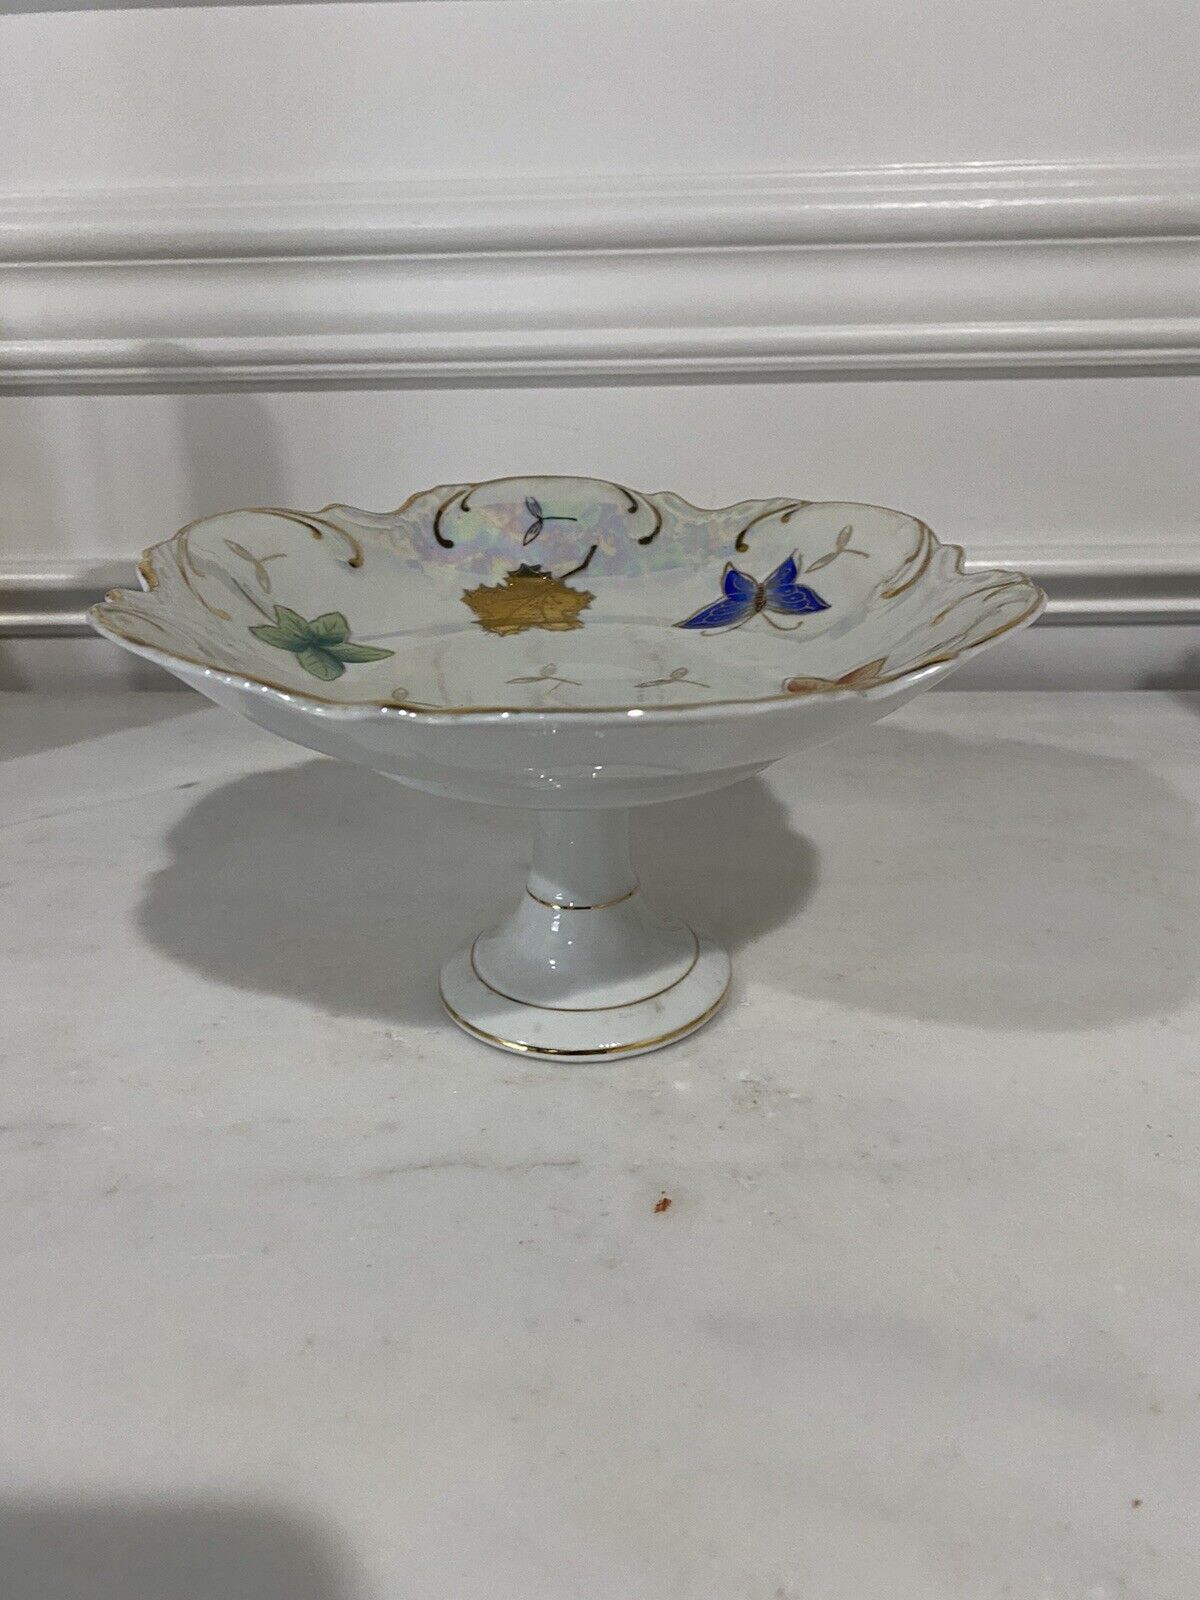 LIPPER & MANN Pedestal Footed Compote Dish Butterflies Leaves Flowers Gold Trim